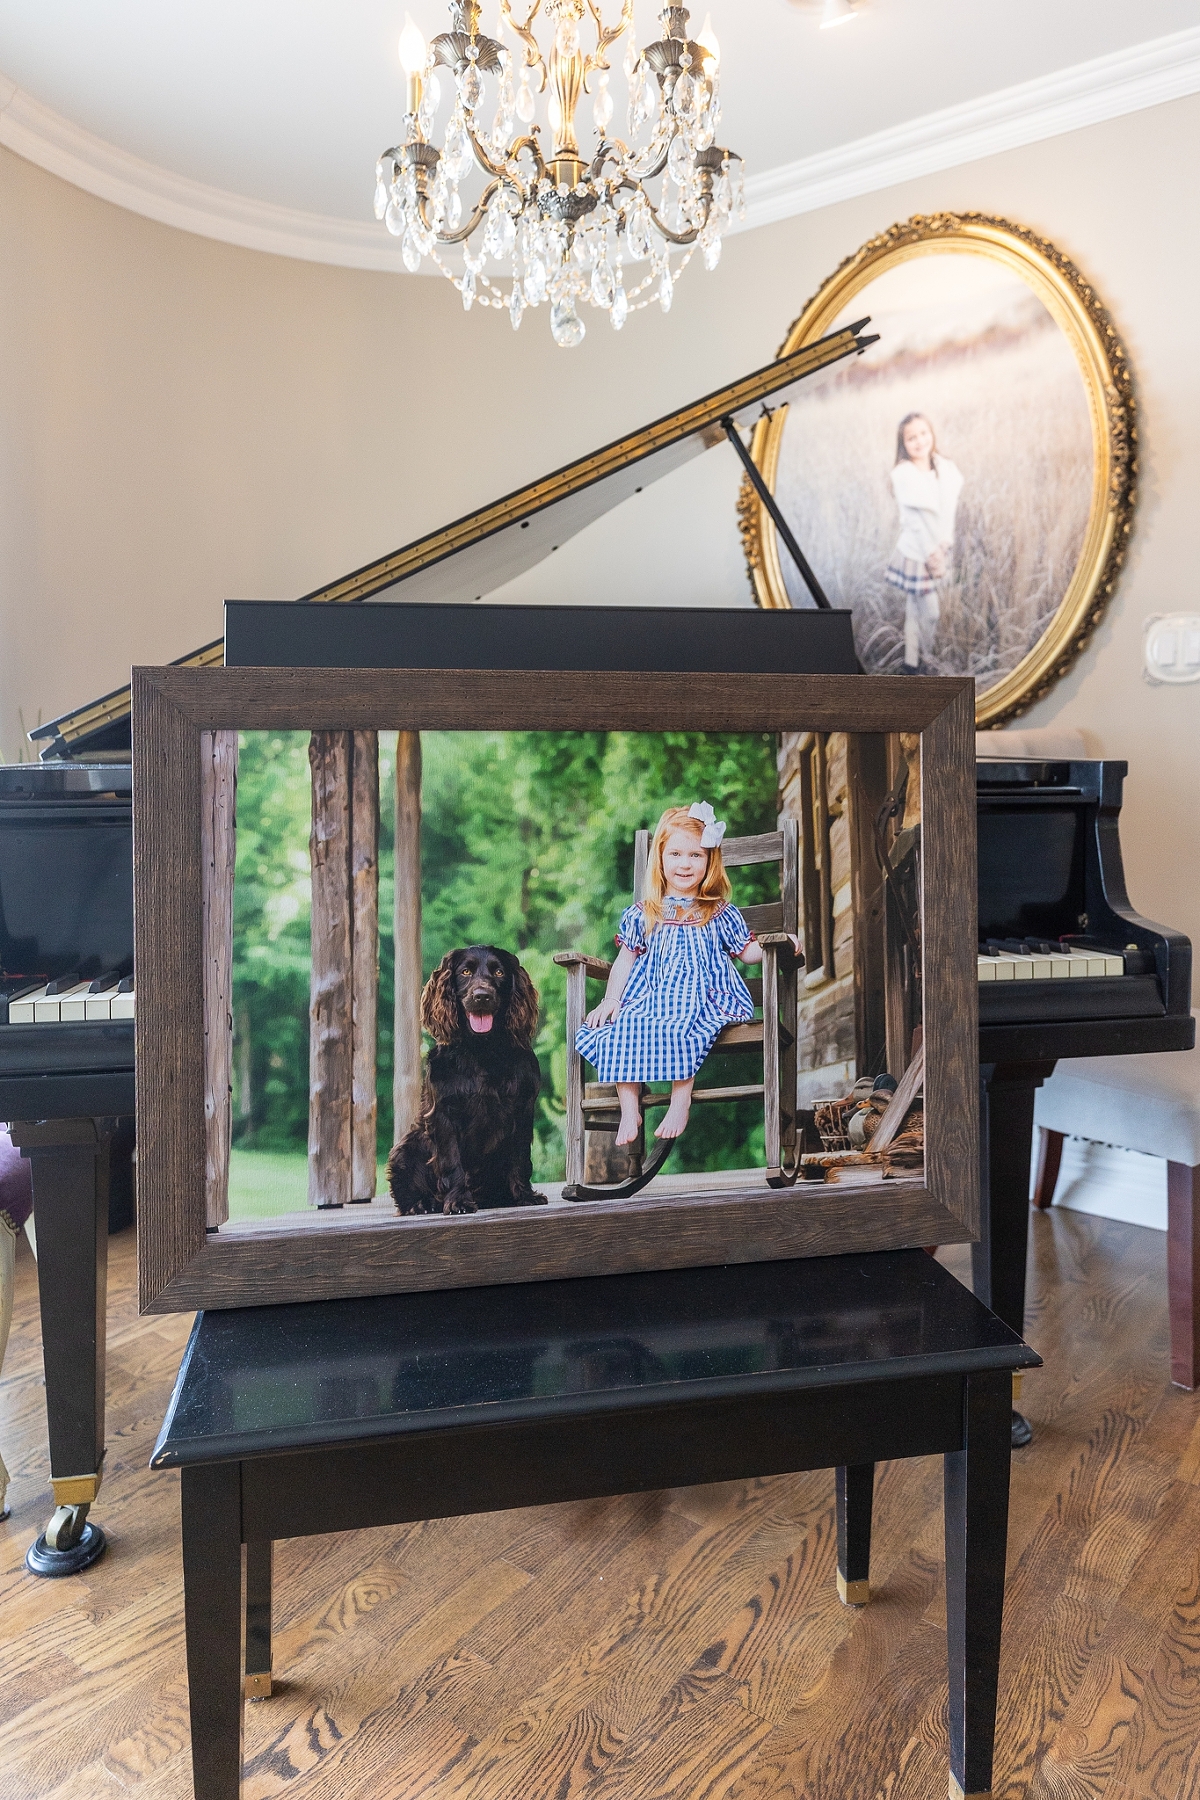 A framed photo of a child and a dog displayed on a grand piano in an elegant room.